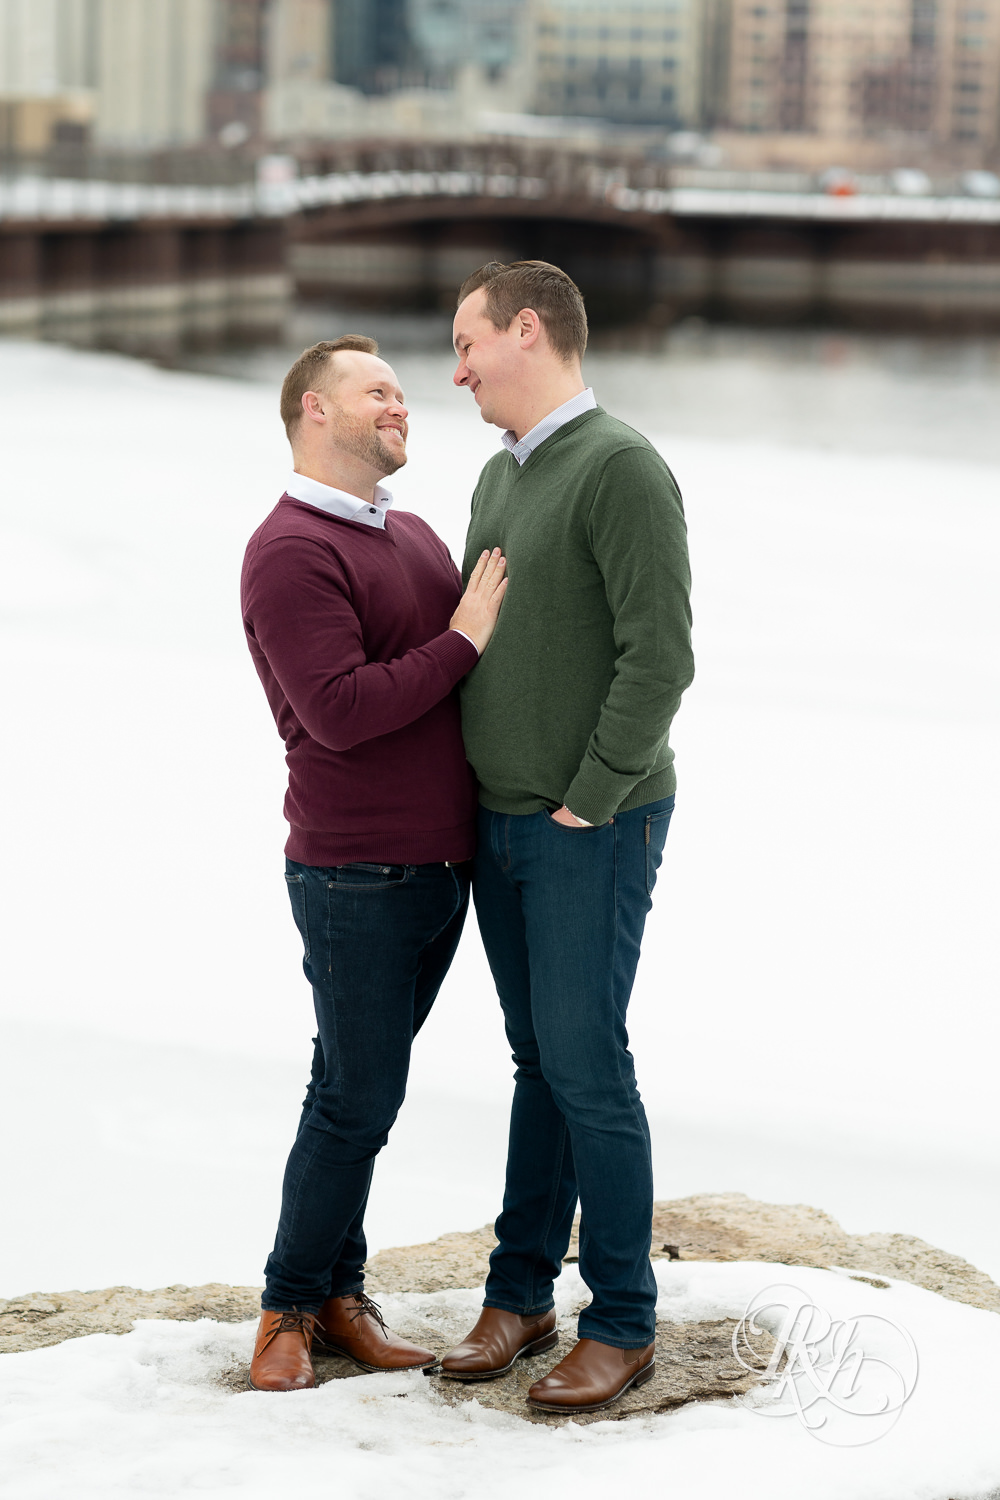 Gay men smile in snow during the winter in Minneapolis, Minnesota.